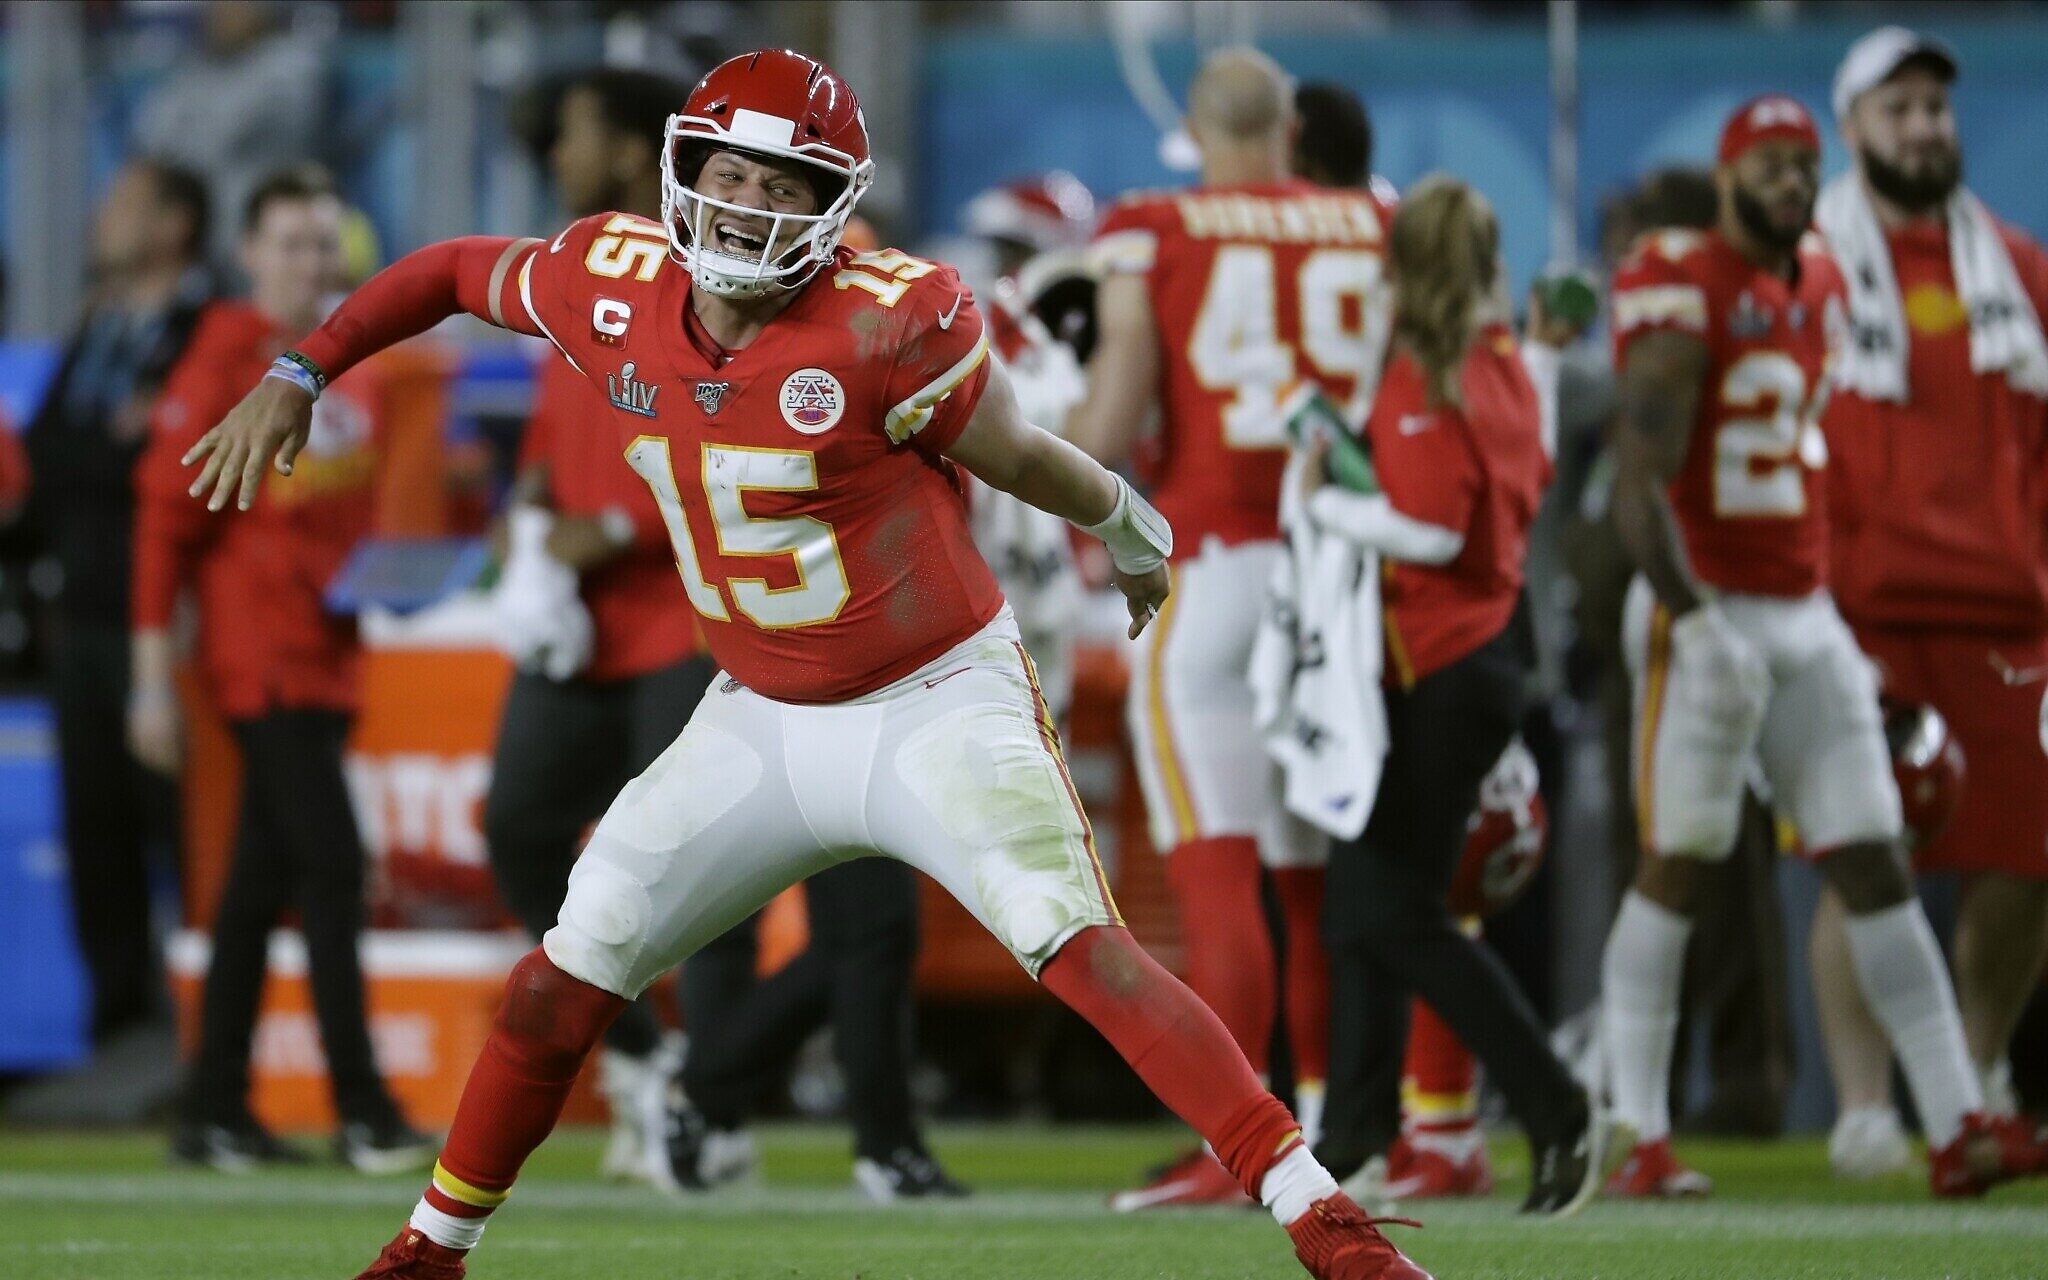 Comeback king Mahomes sparks Chiefs to Super Bowl win after 50-year wait